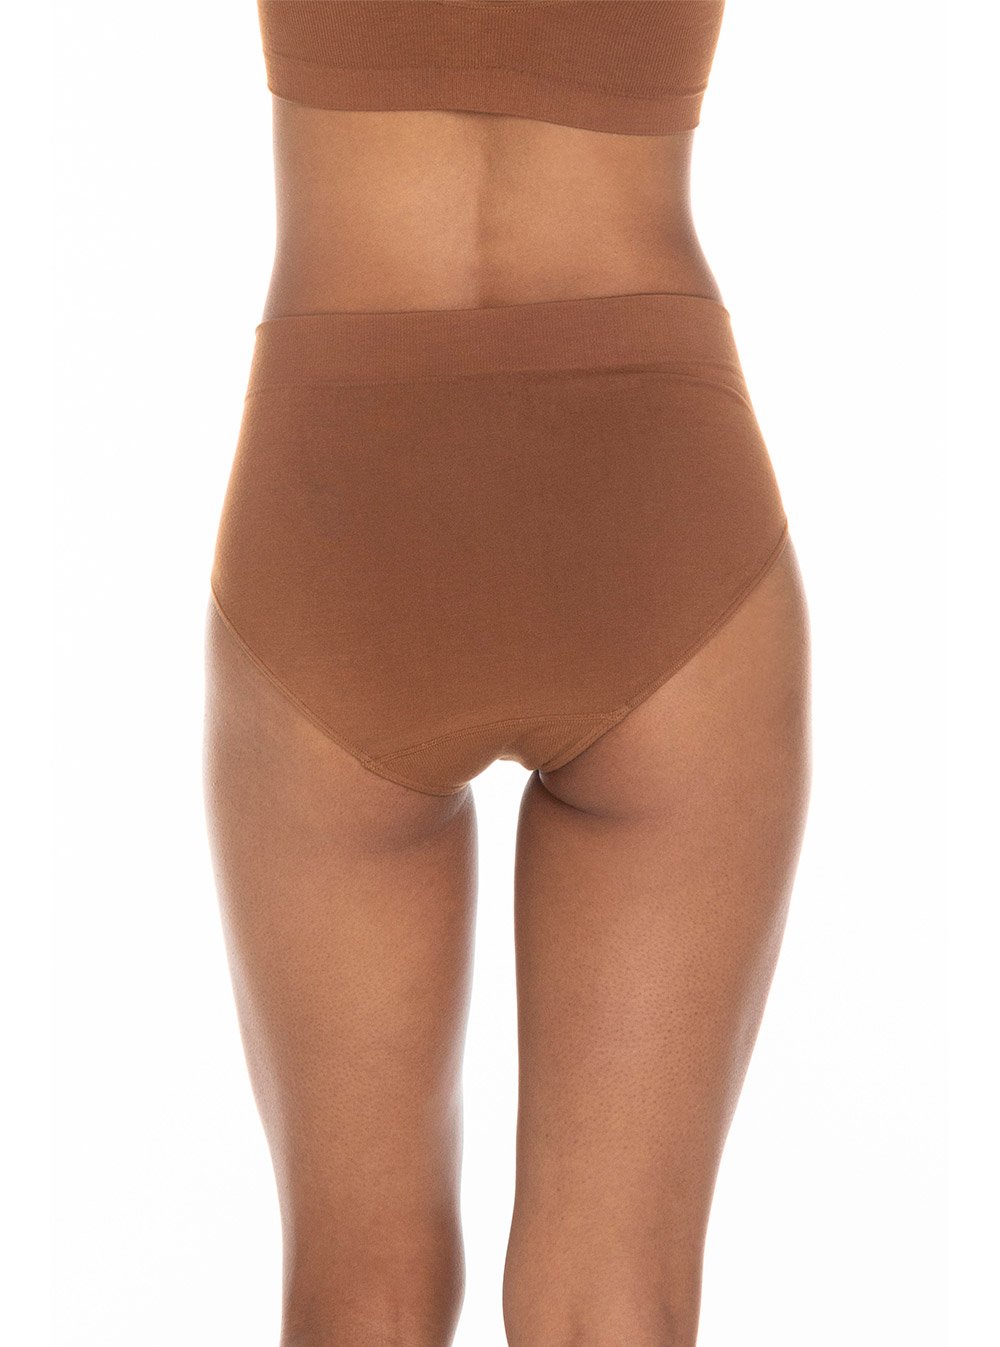 Boody Body EcoWear Women's Full Brief, Full Coverage High Waisted, Soft  Breathable Panties, Seamless Stretch, Bamboo Viscose